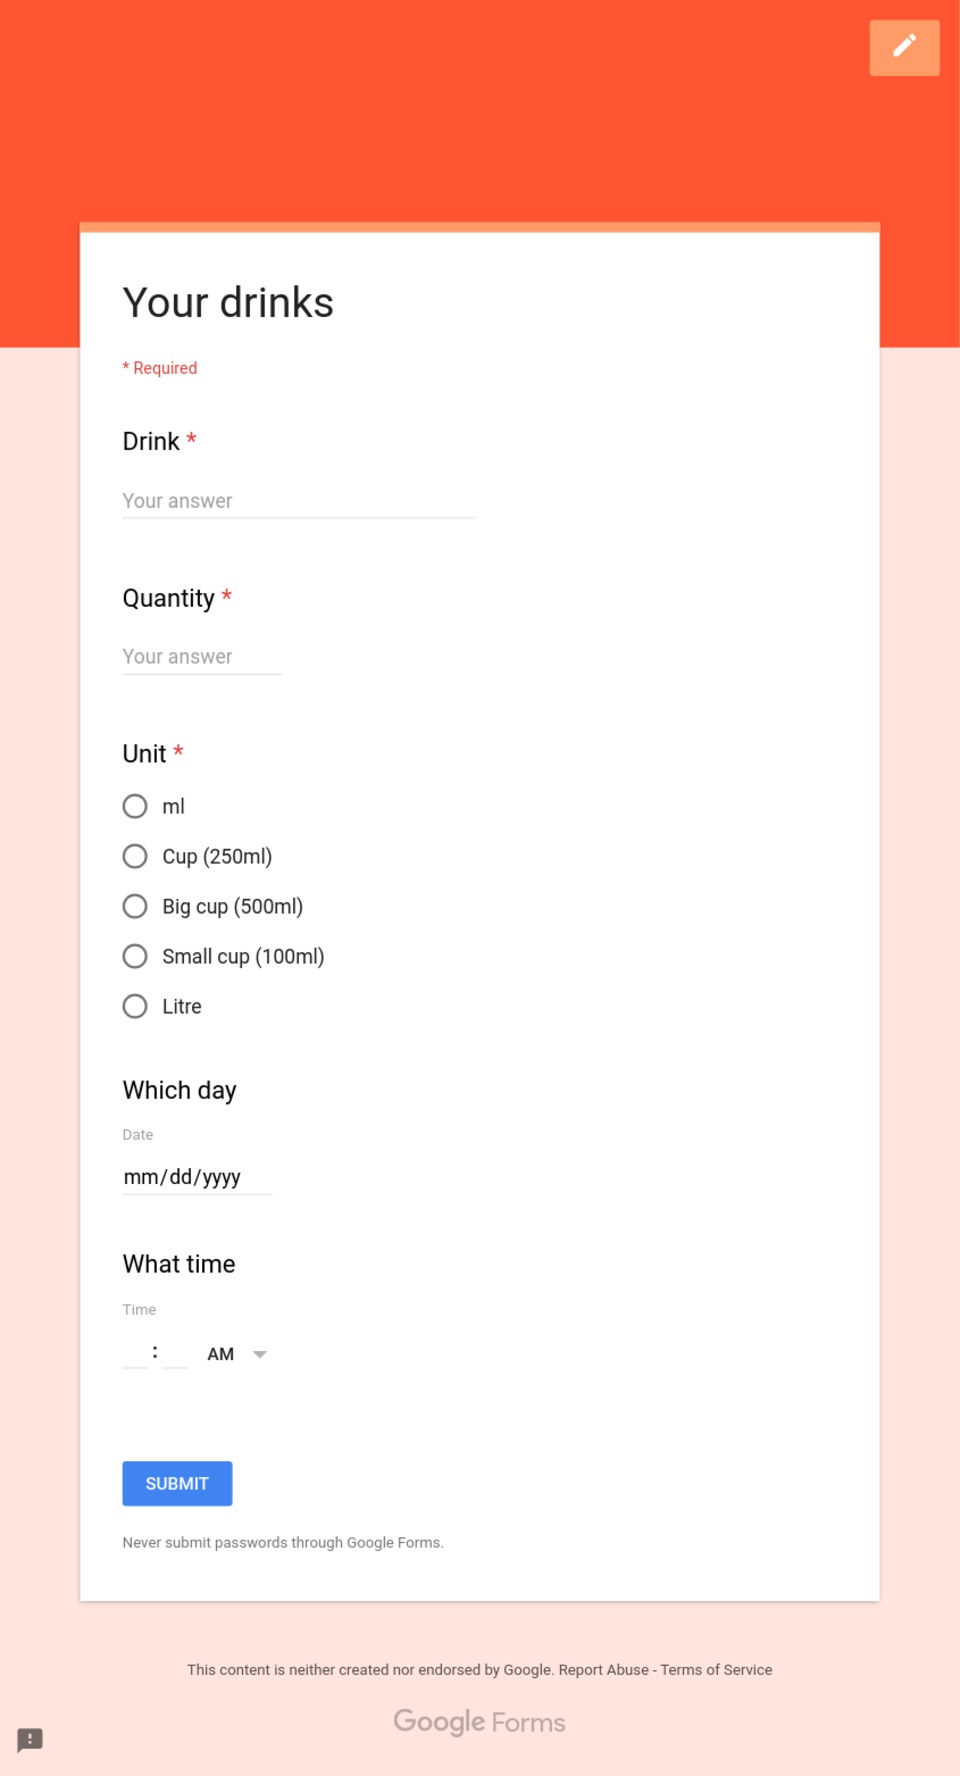 A google form, tracking the kind of drink I consume with date and time